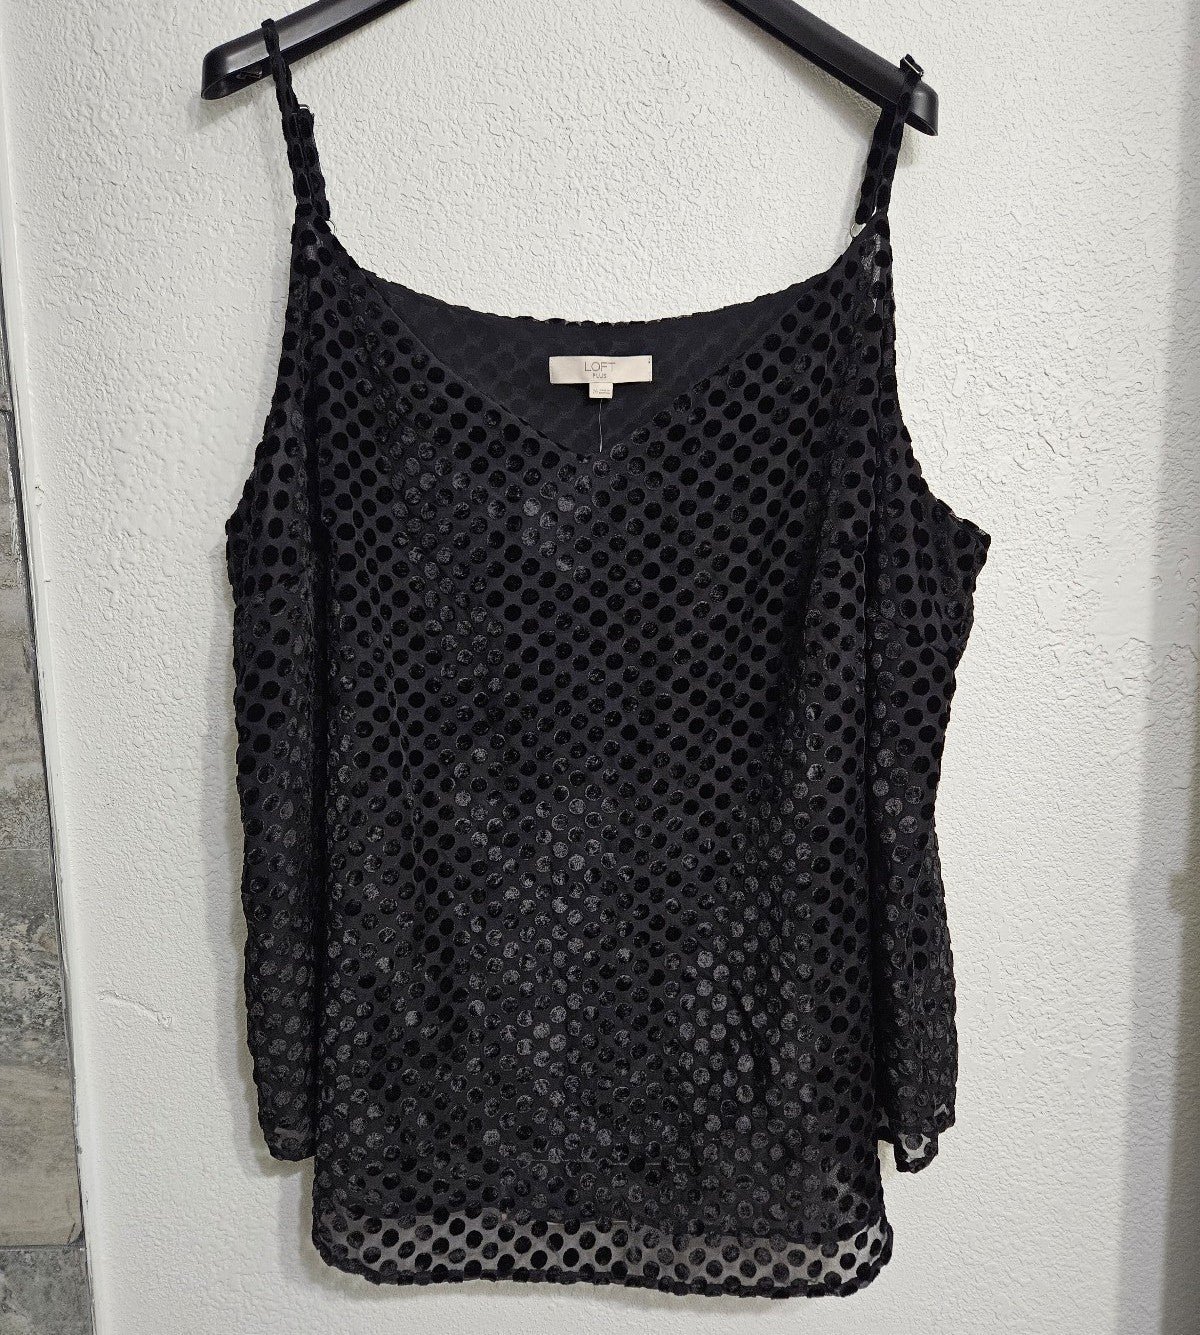 the Lowest price Stylish LOFT Cami Black Top New with t